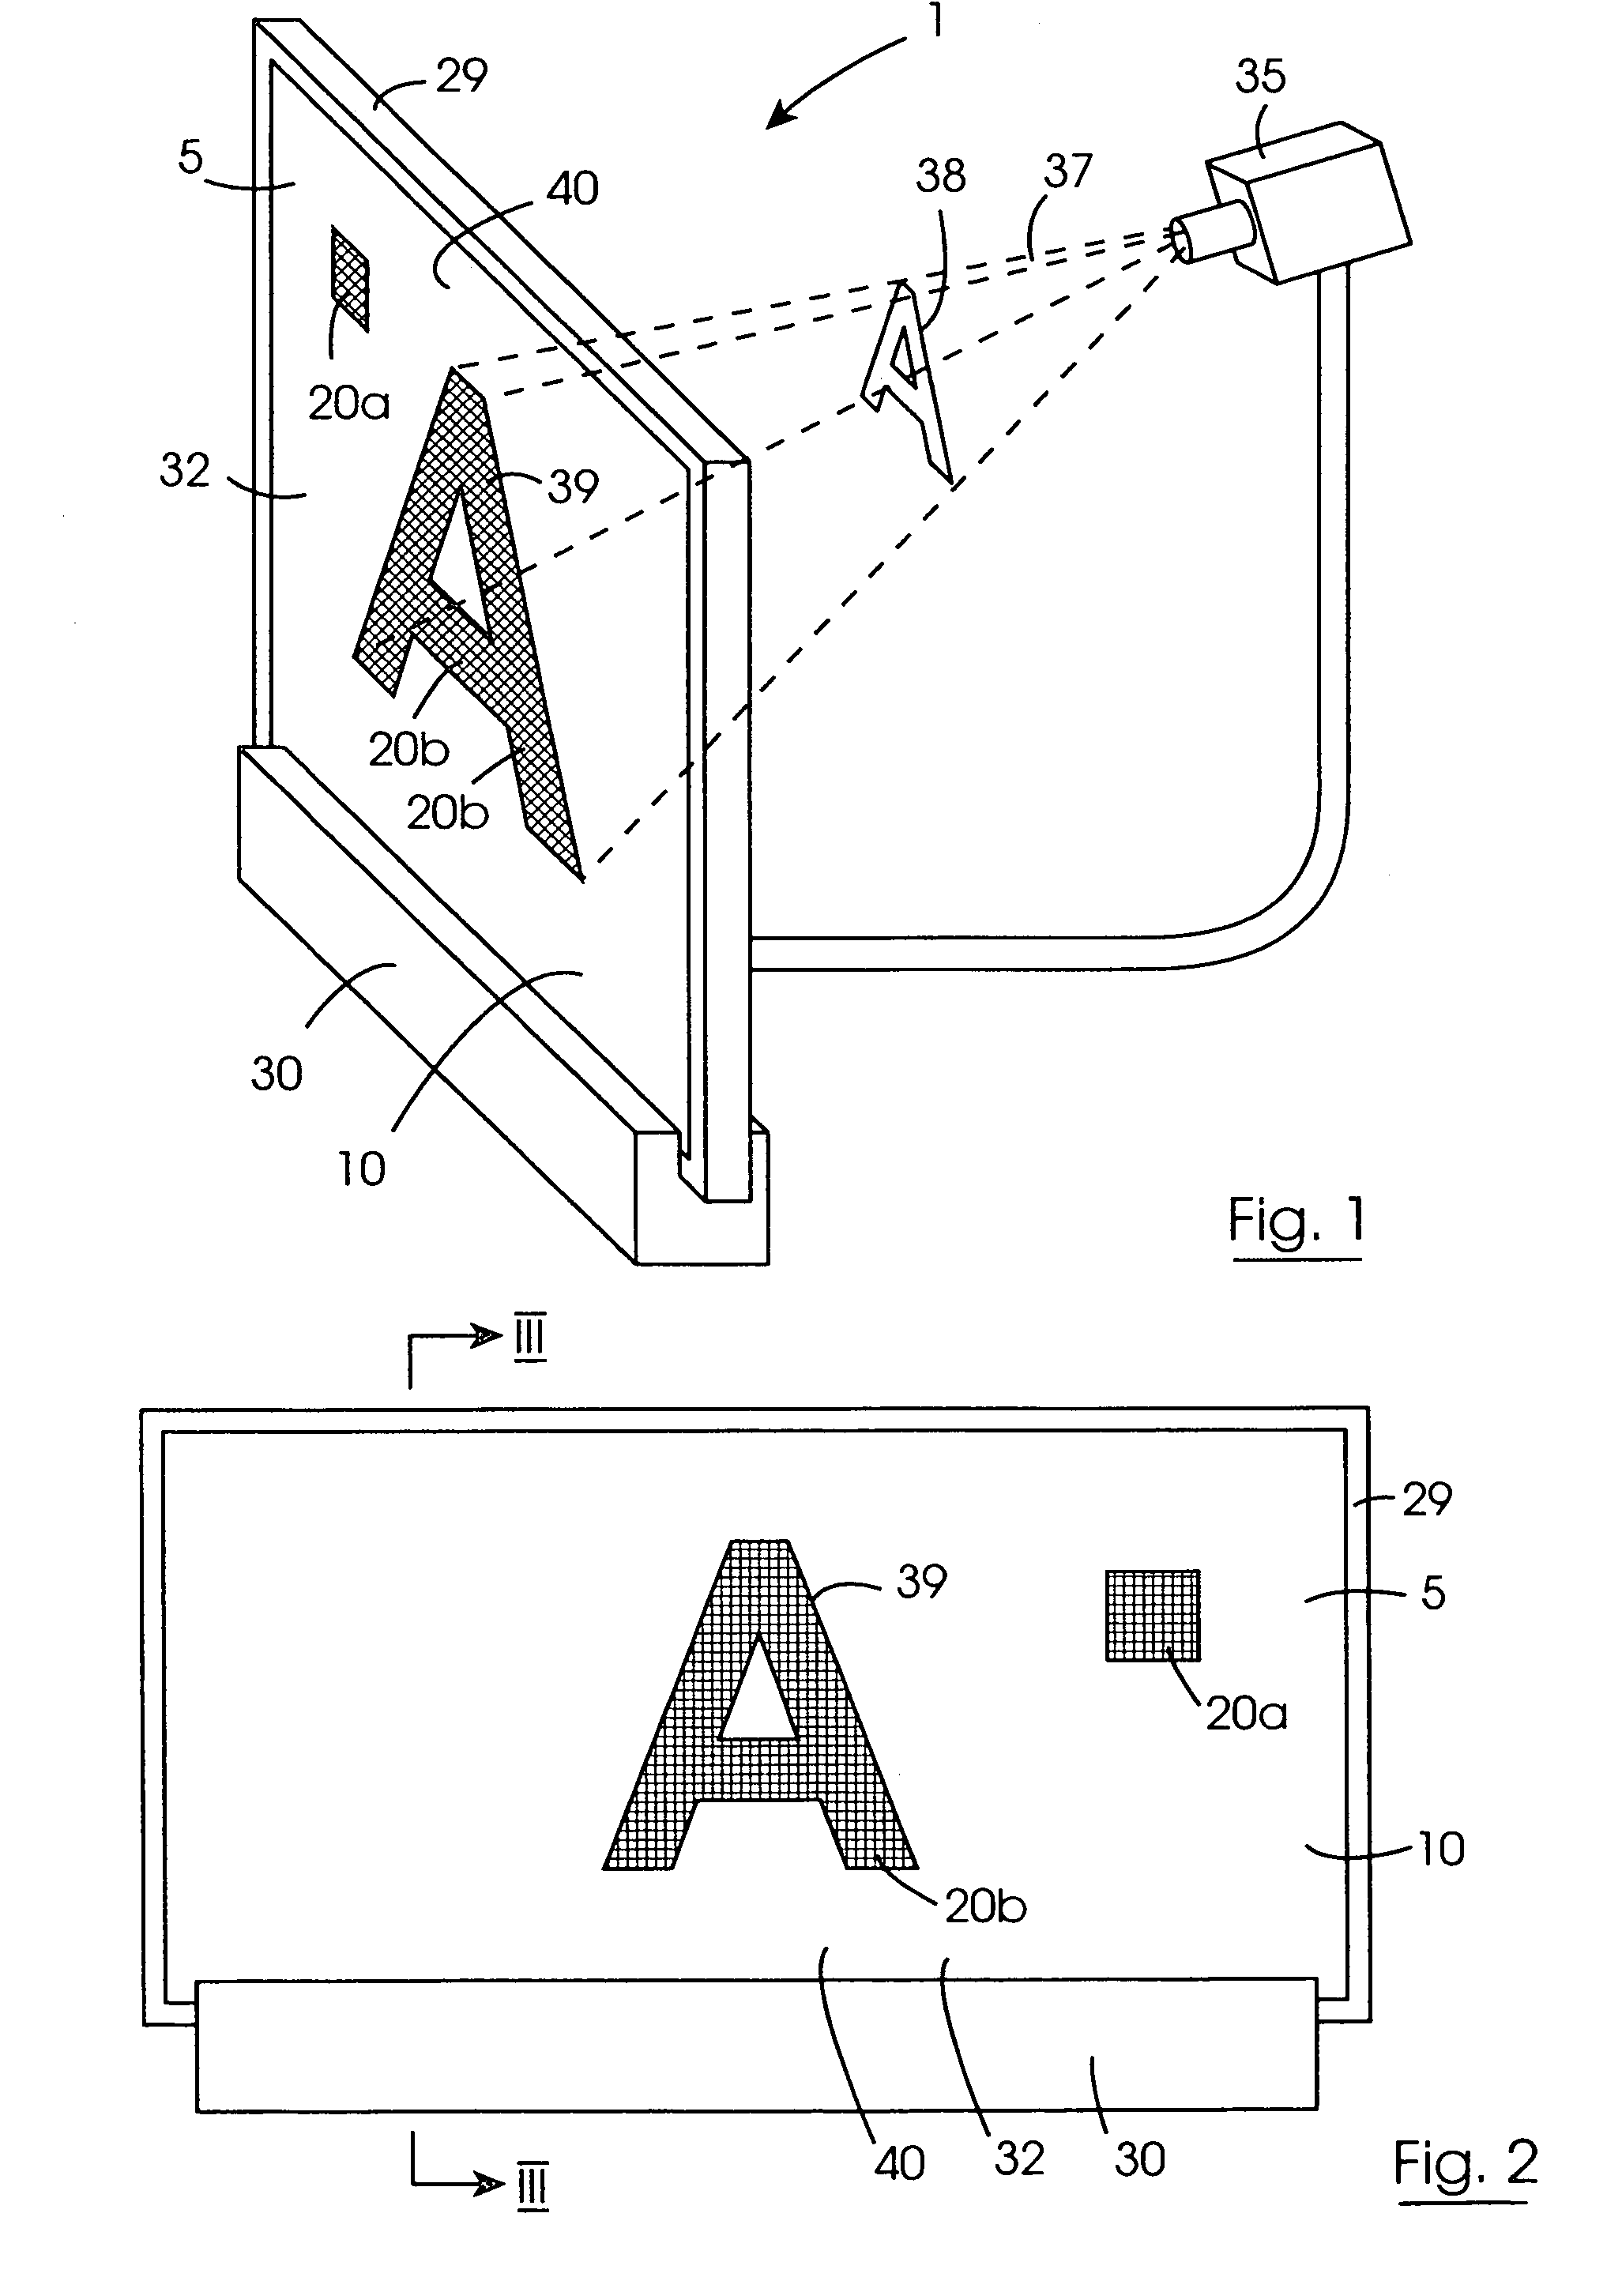 Visual display device and a method for operating a visual display panel